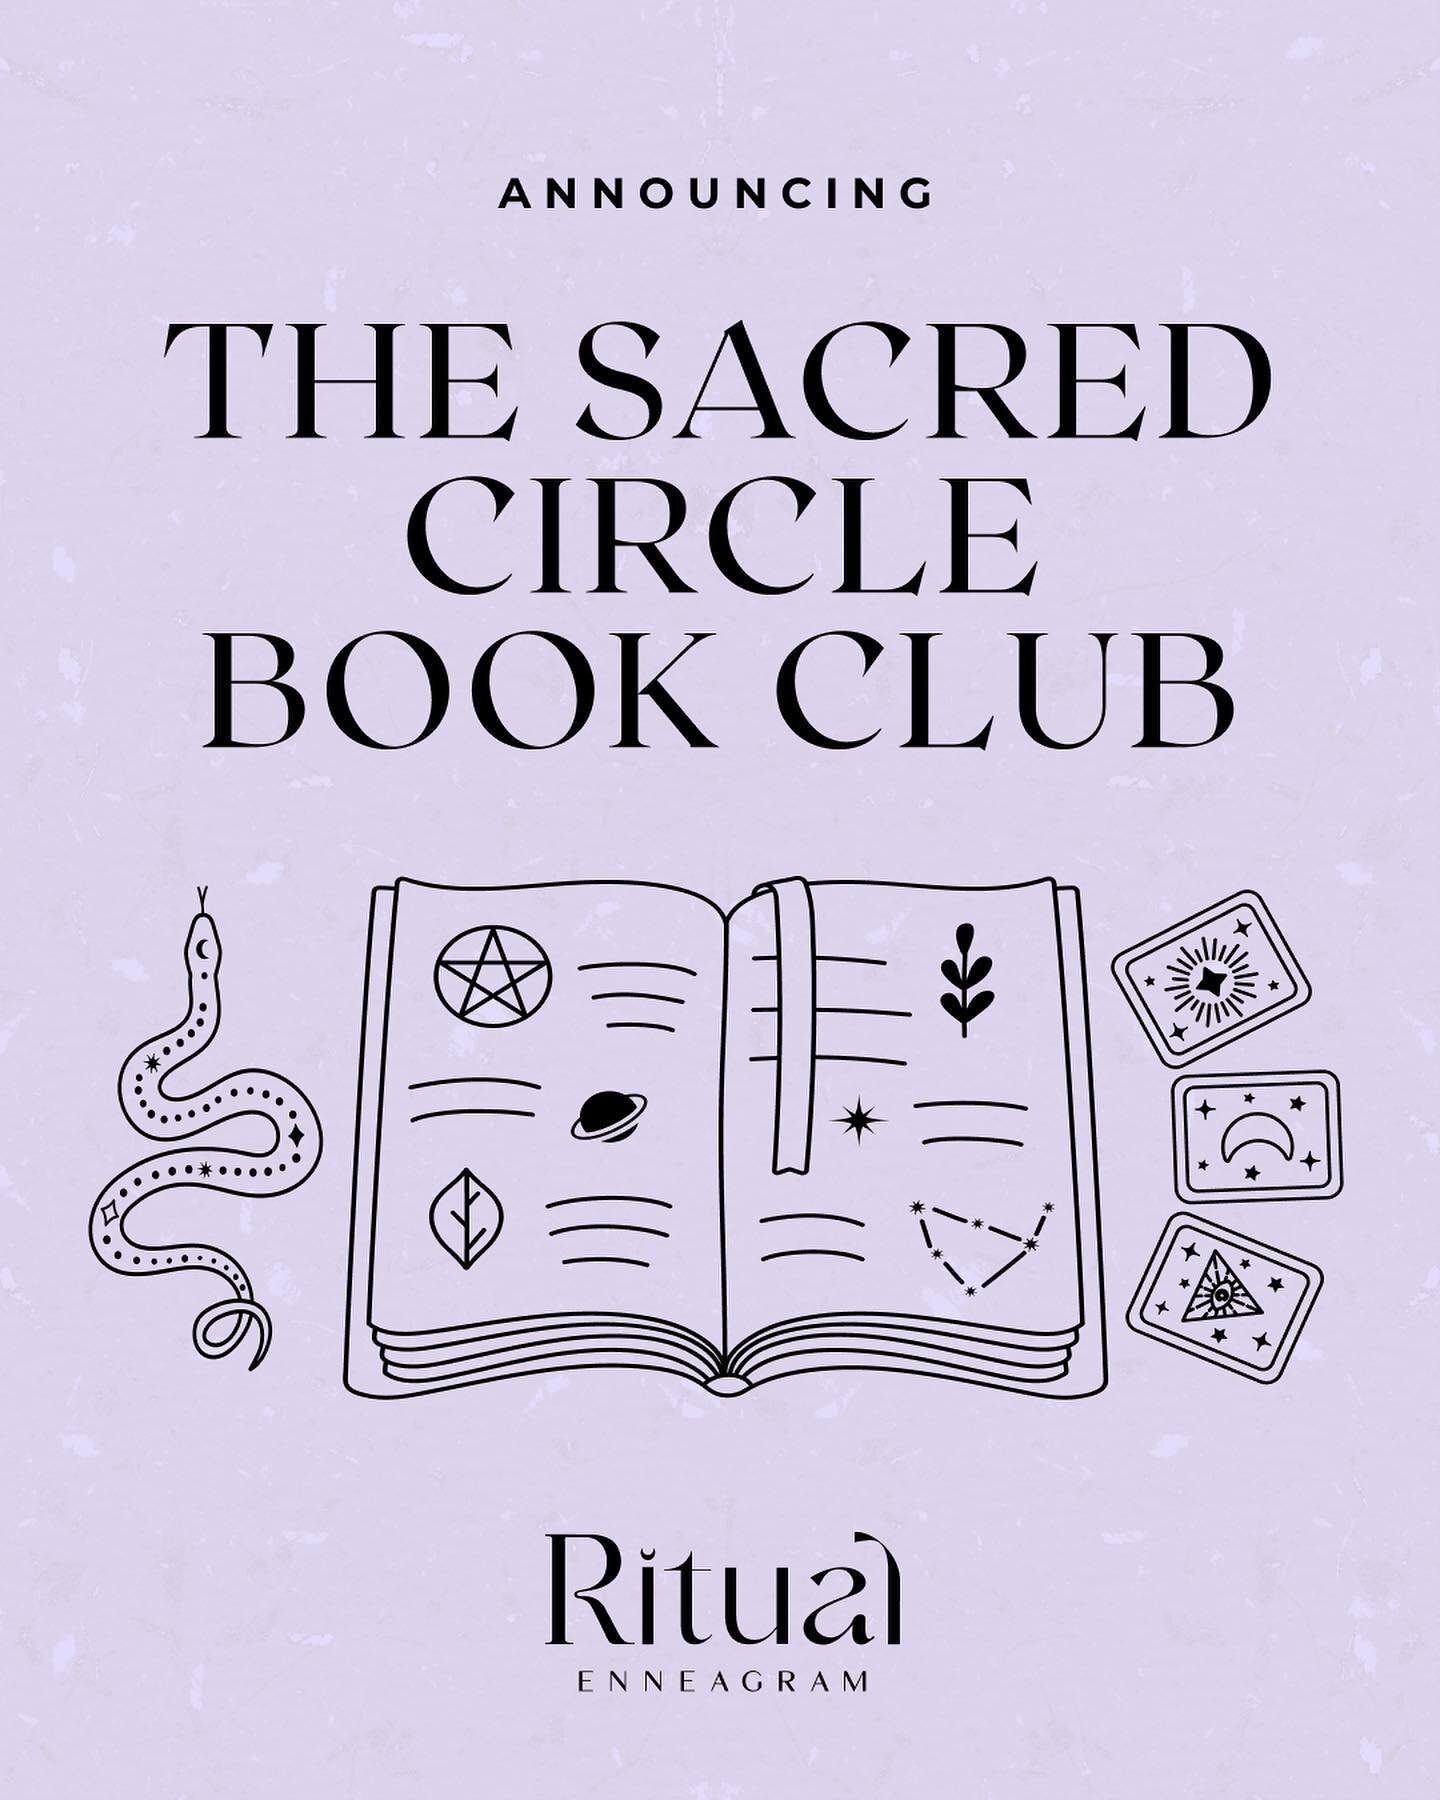 🌙📚 Explore Magick every month through Books!📚🔮

Introducing &quot;The Sacred Circle Book Club&quot; - Lee&rsquo;s second monthly book club and magical literary community of exploration and connection!

Whether you're a book lover, a seeker of spi